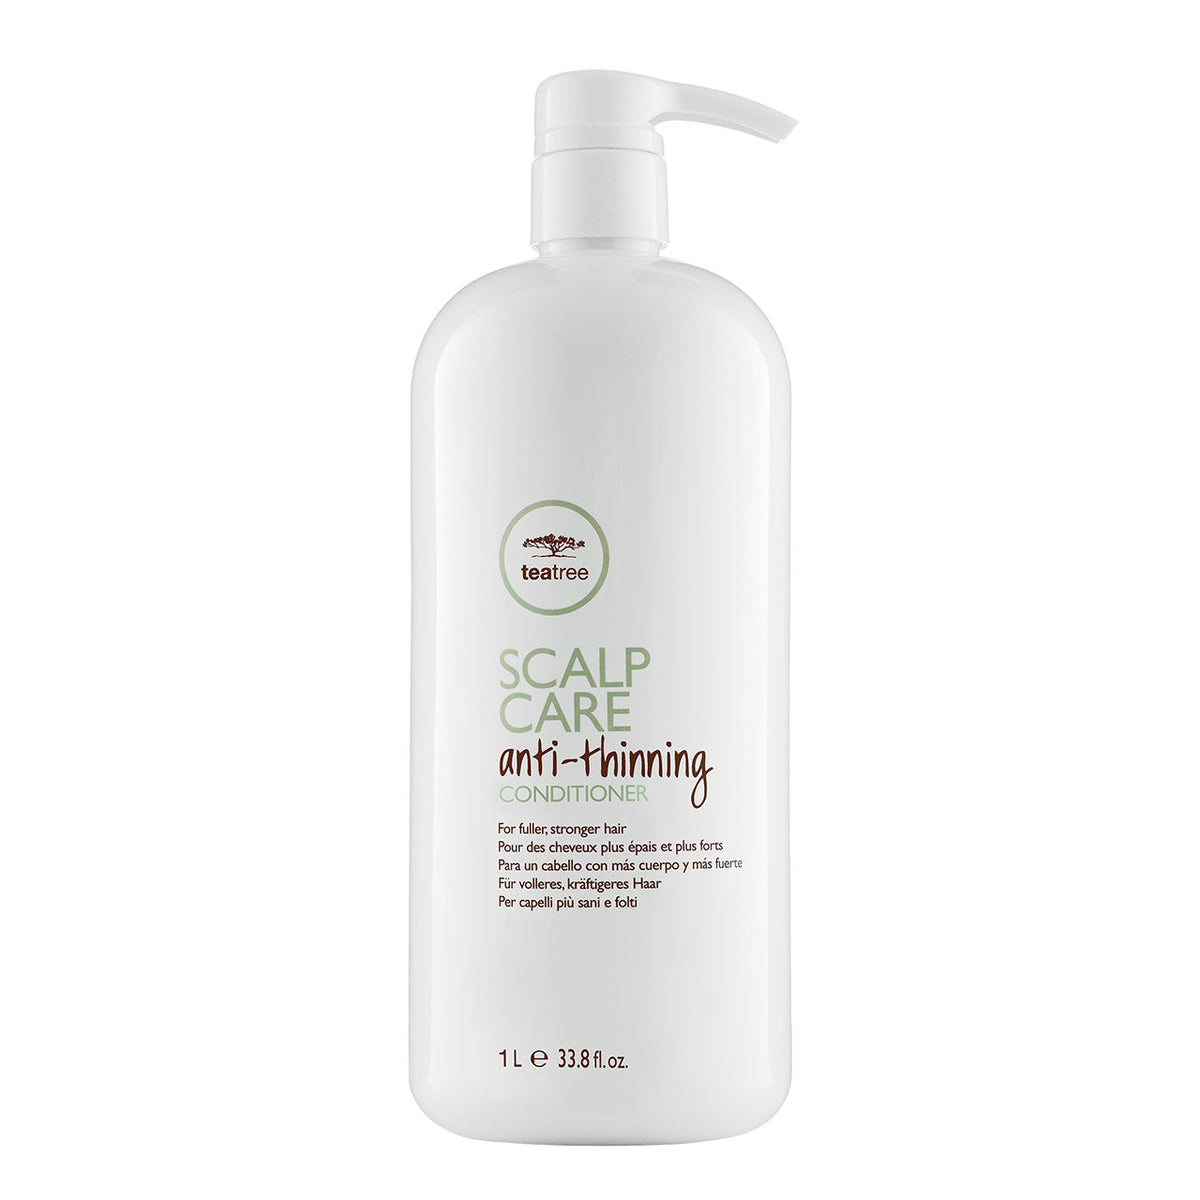 Tea Tree Scalp Care Anti-Thinning Conditioner - 1L - by Paul Mitchell |ProCare Outlet|